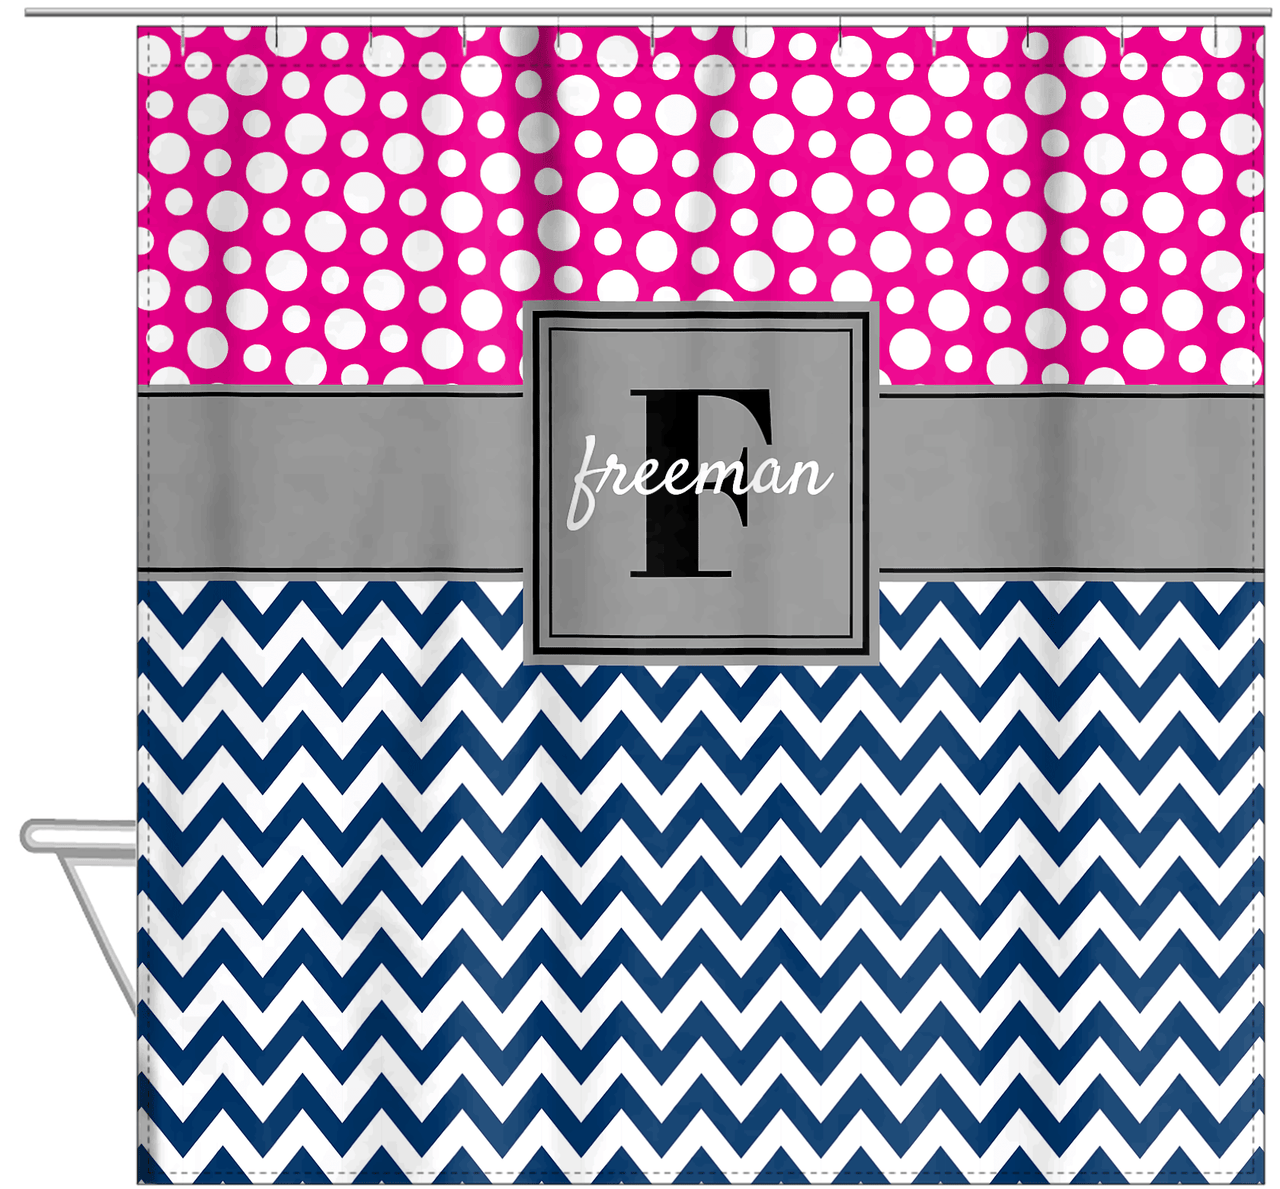 Personalized Polka Dots and Chevron I Shower Curtain - Pink and Navy - Square Nameplate - Hanging View